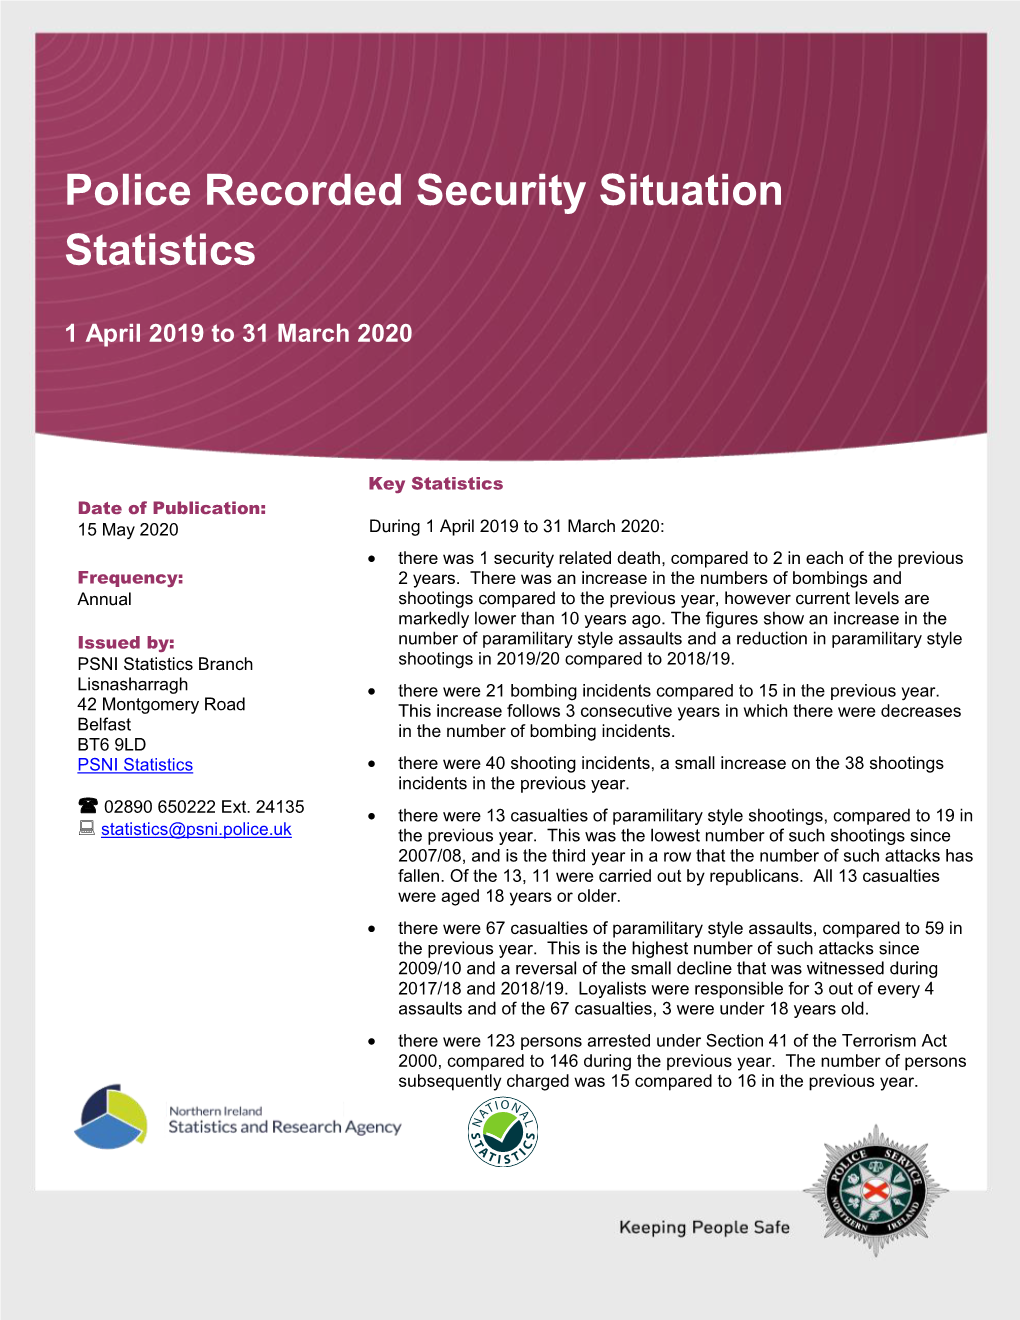 Police Recorded Security Situation Statistics